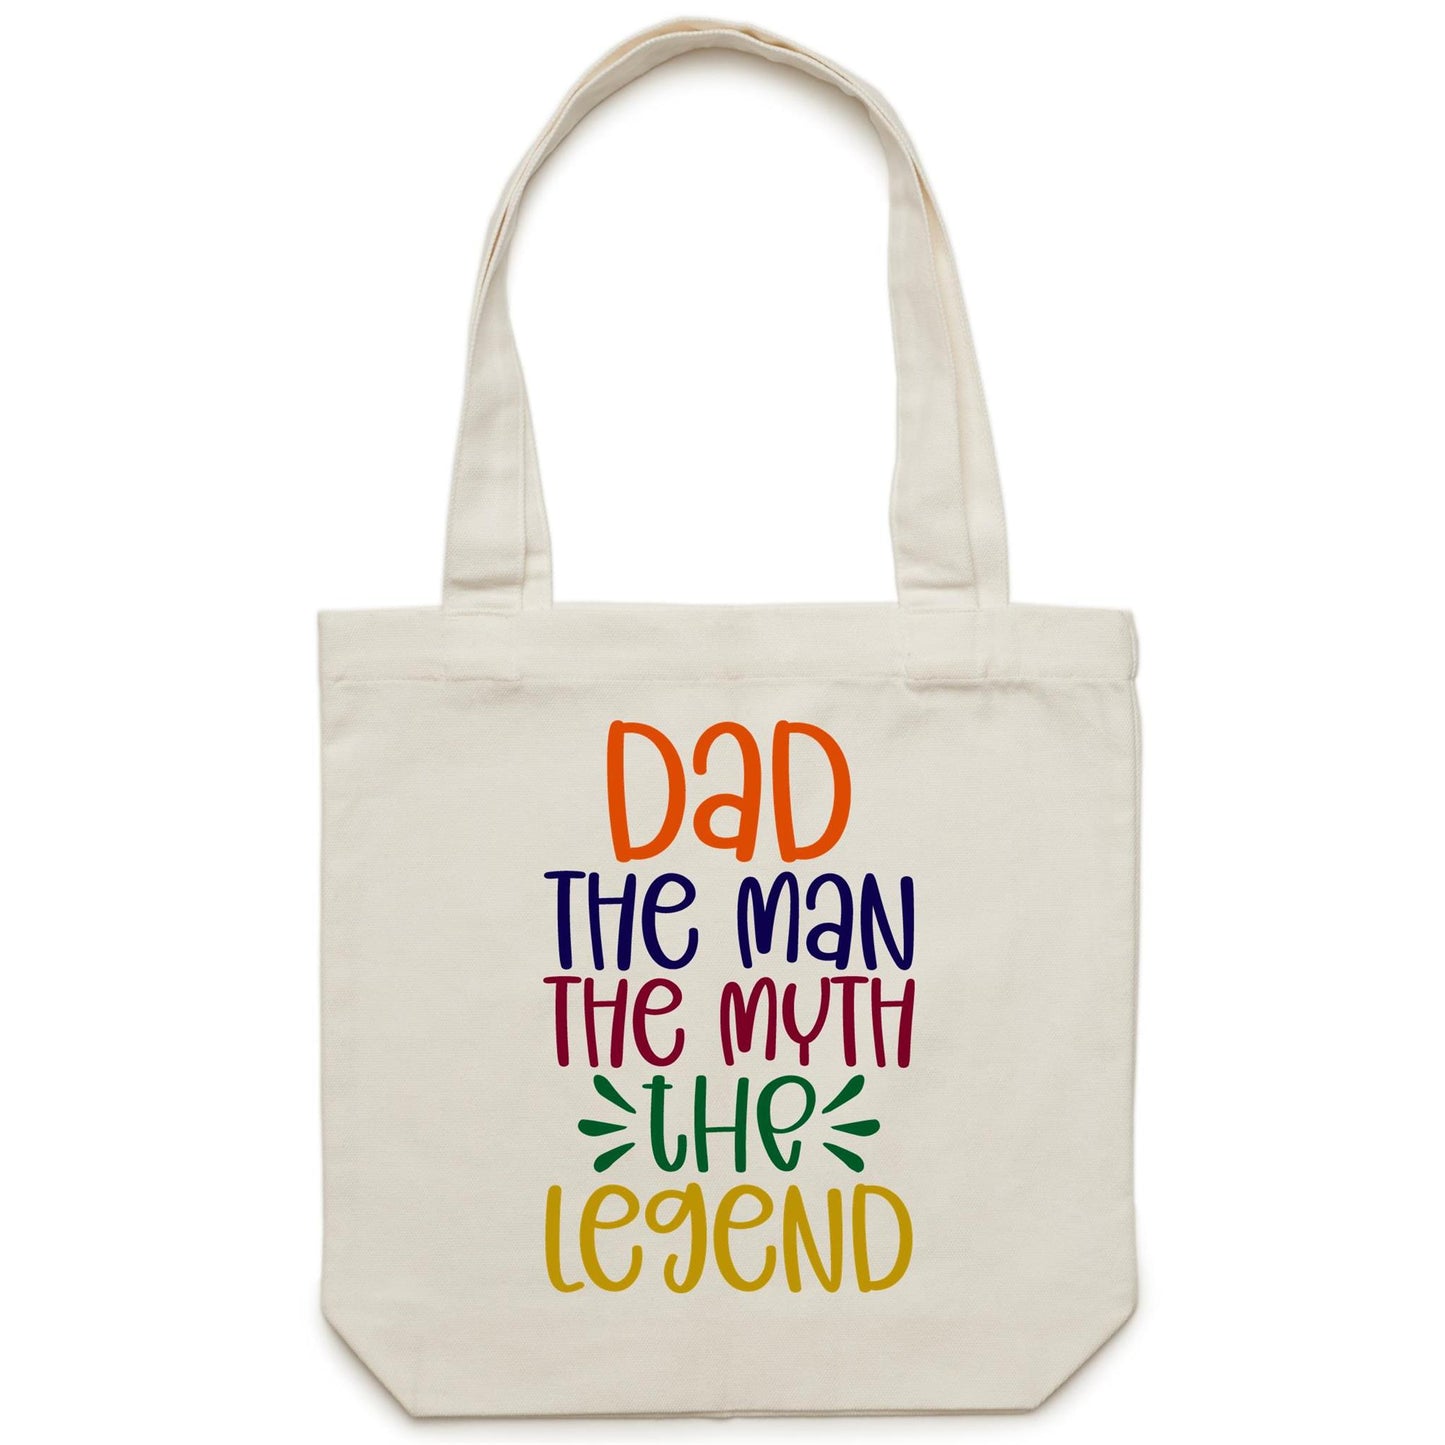 Dad, The Man, The Myth, The Legend - Canvas Tote Bag Default Title Tote Bag Dad